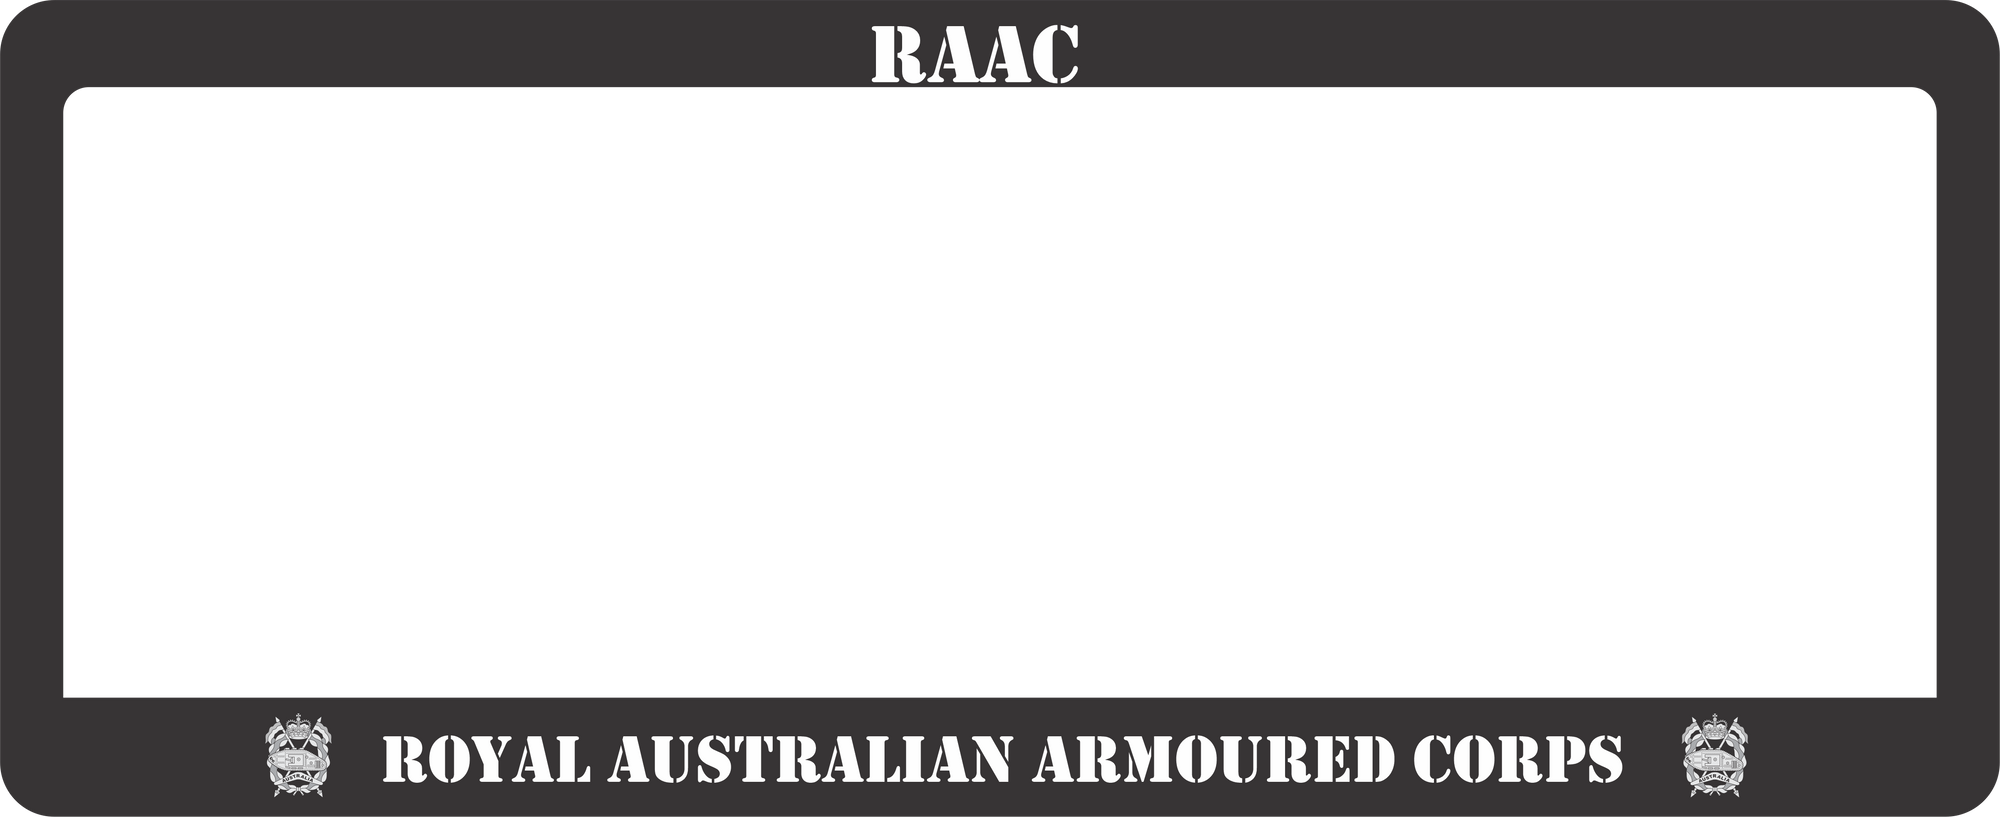 RAAC NUMBER PLATE SURROUNDS STANDARD